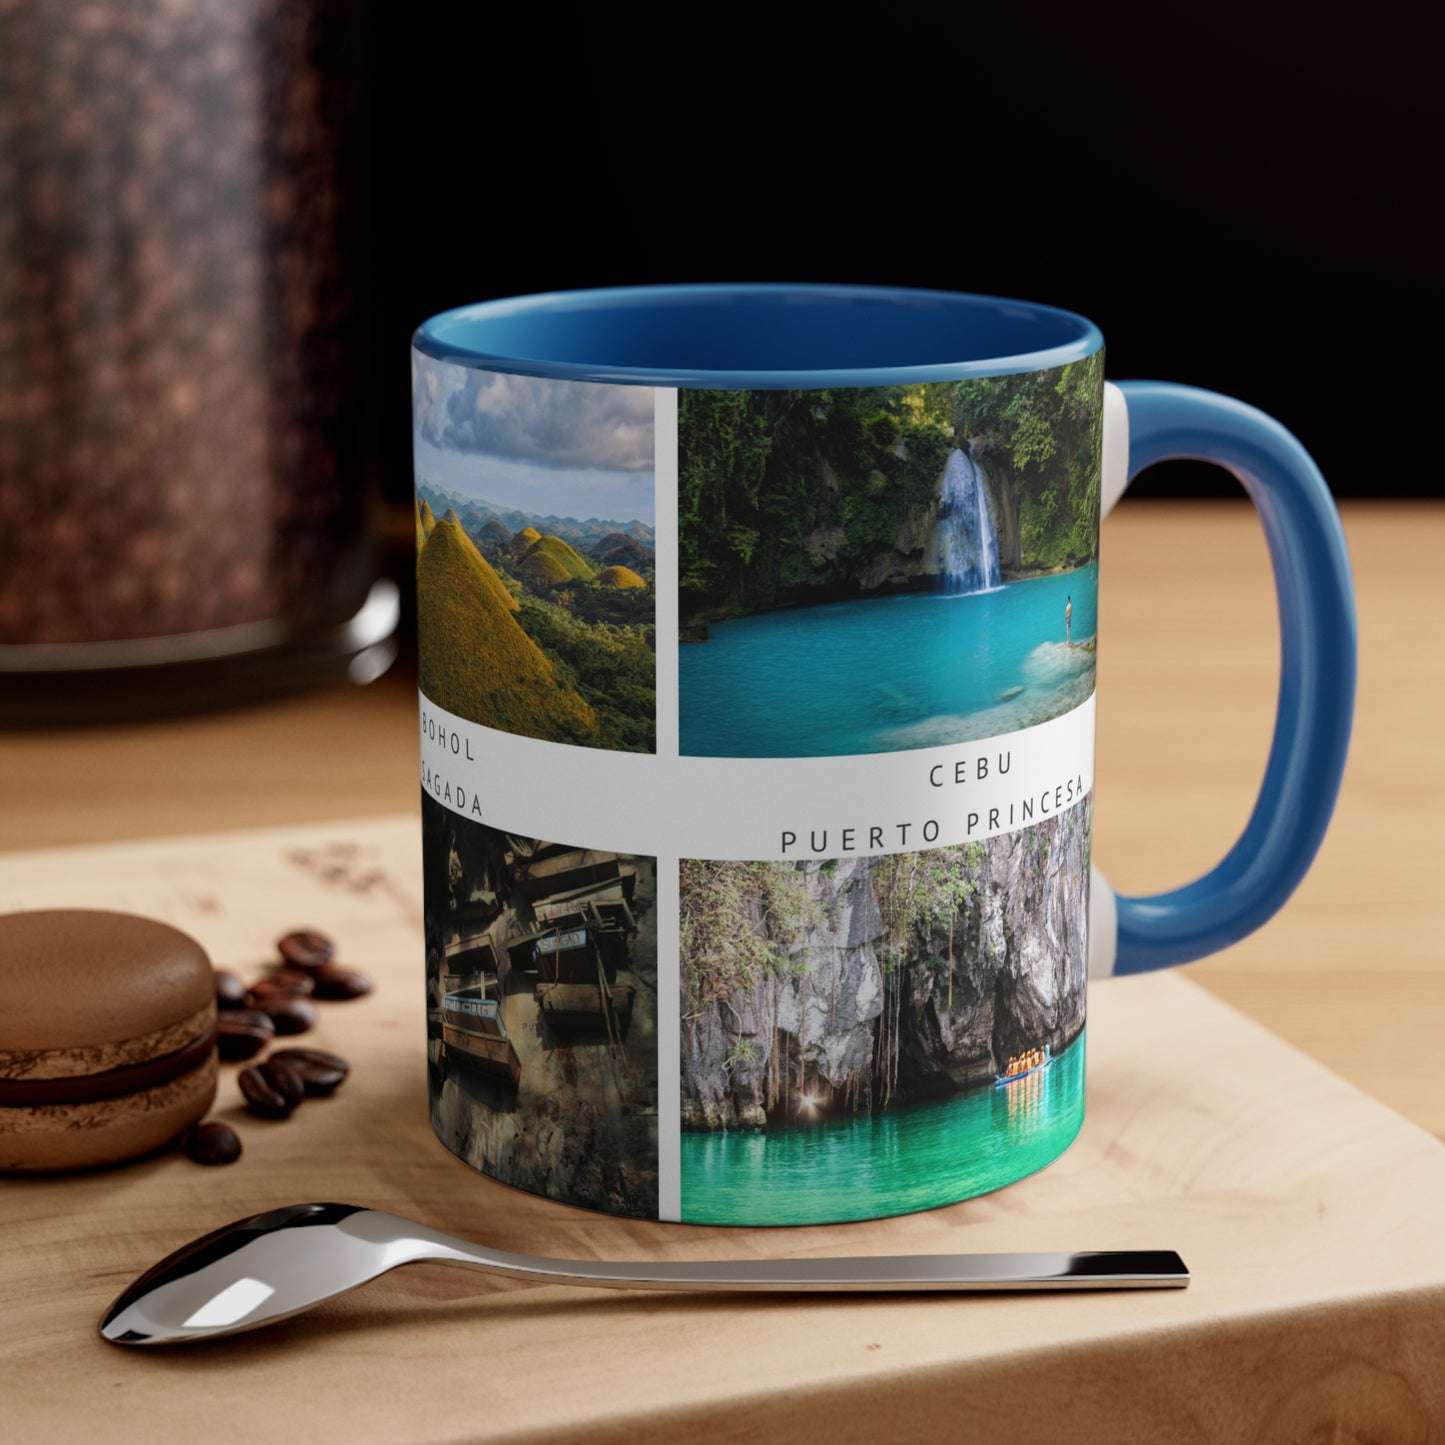 Philippines! This Travel Accent Coffee Mug is a part of a Travel Series for you to choose from. 11oz. Great as a gift or get one to enjoy yourself.